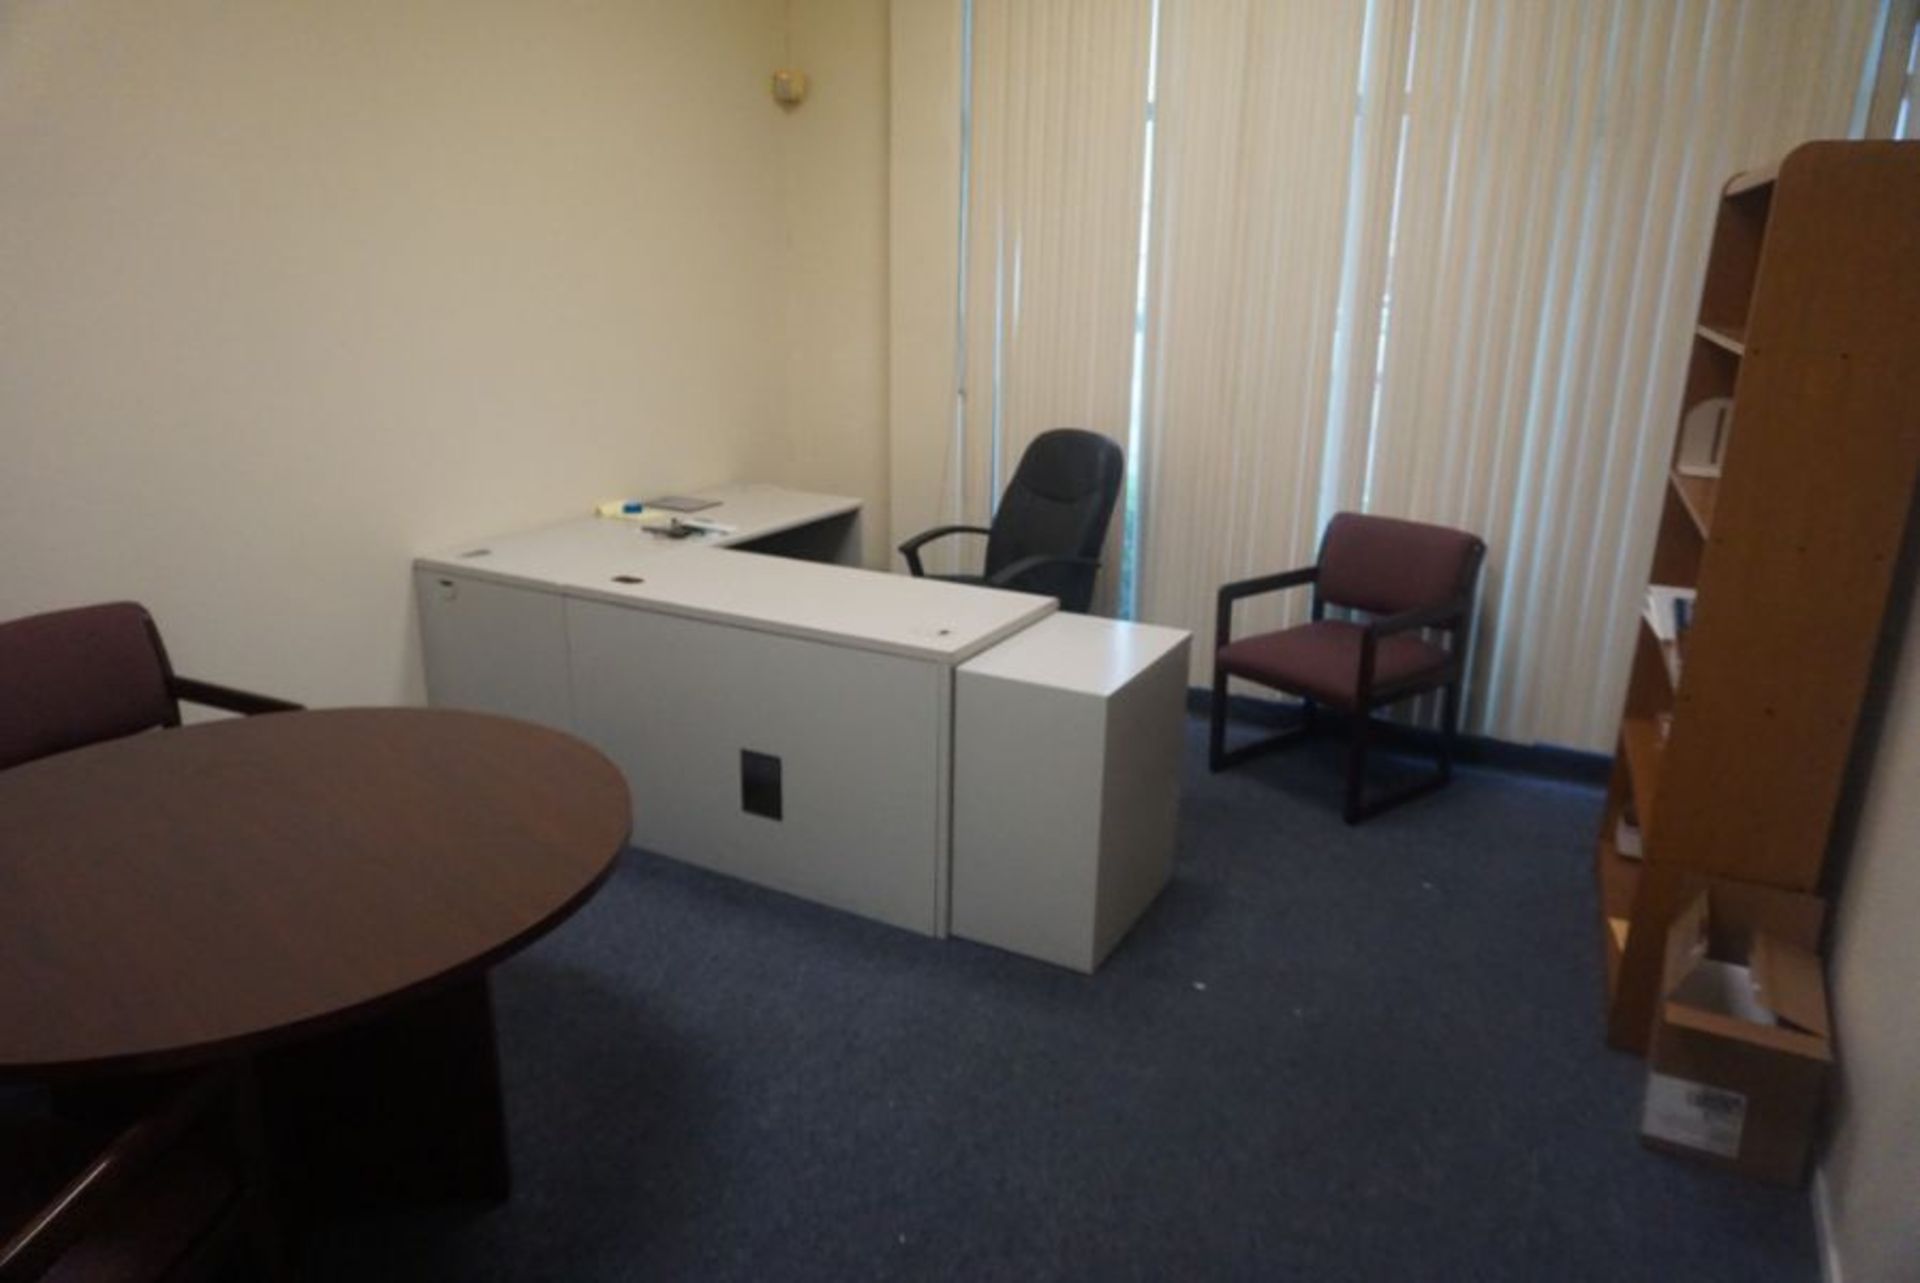 Room Content, Office Desk Chairs, and Book Shelf - Image 2 of 4